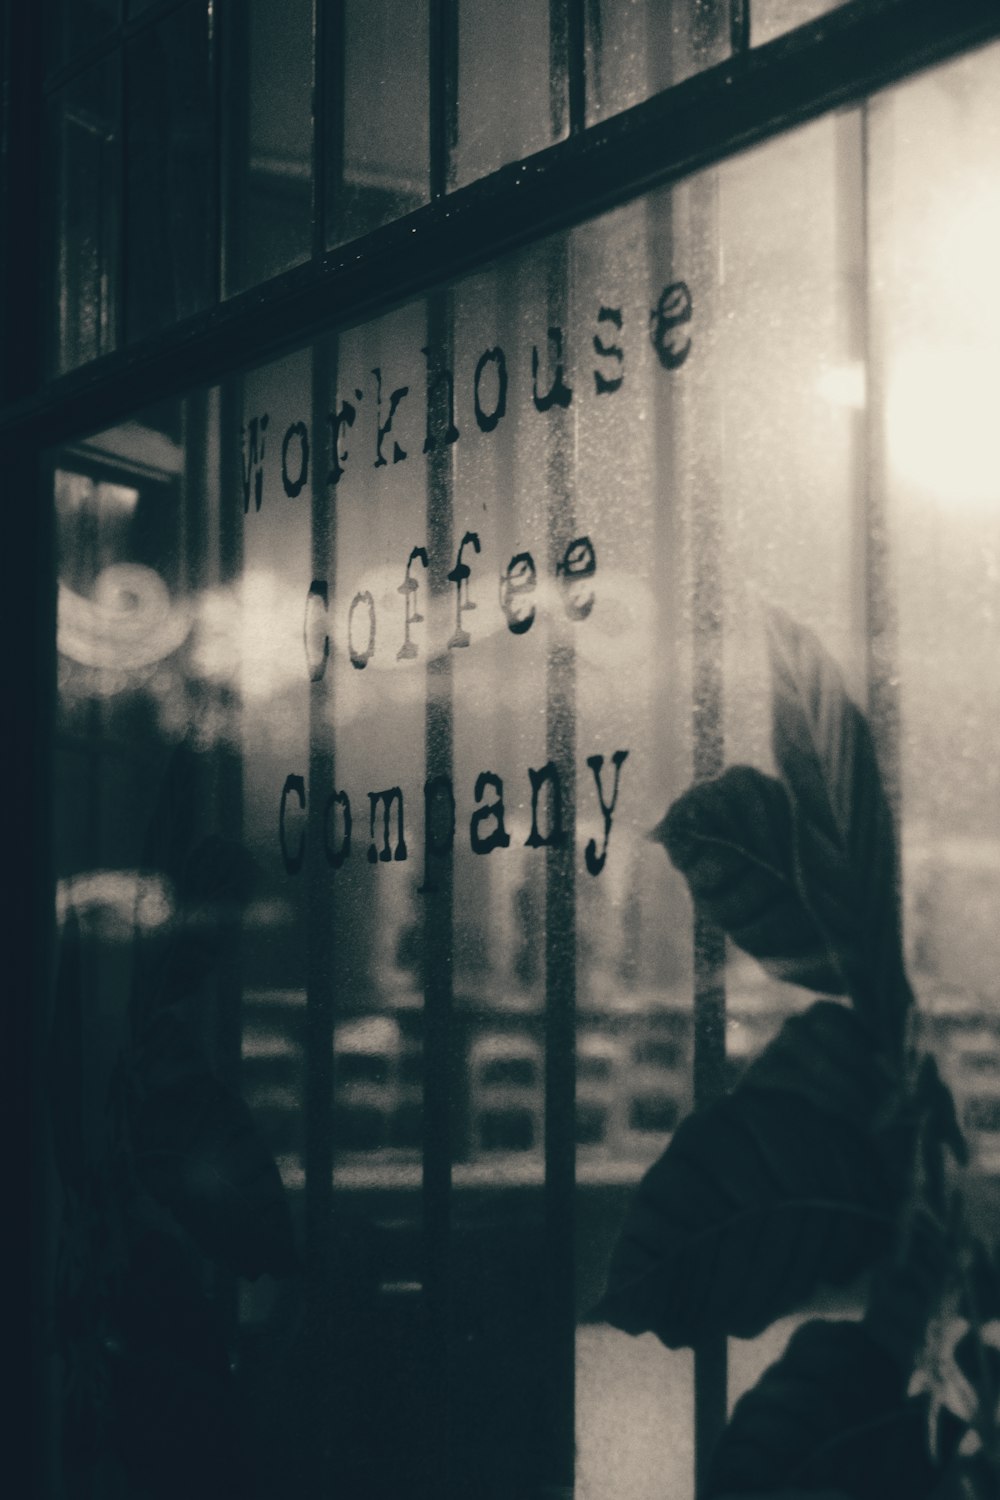 Workhouse Coffee Company text